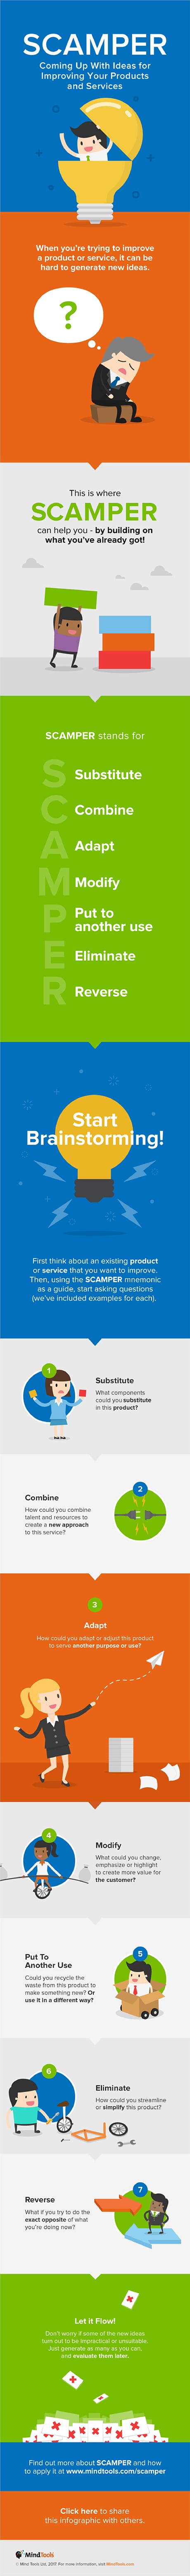 How to Create a Product That Customers Really Need - SCAMPER infographic